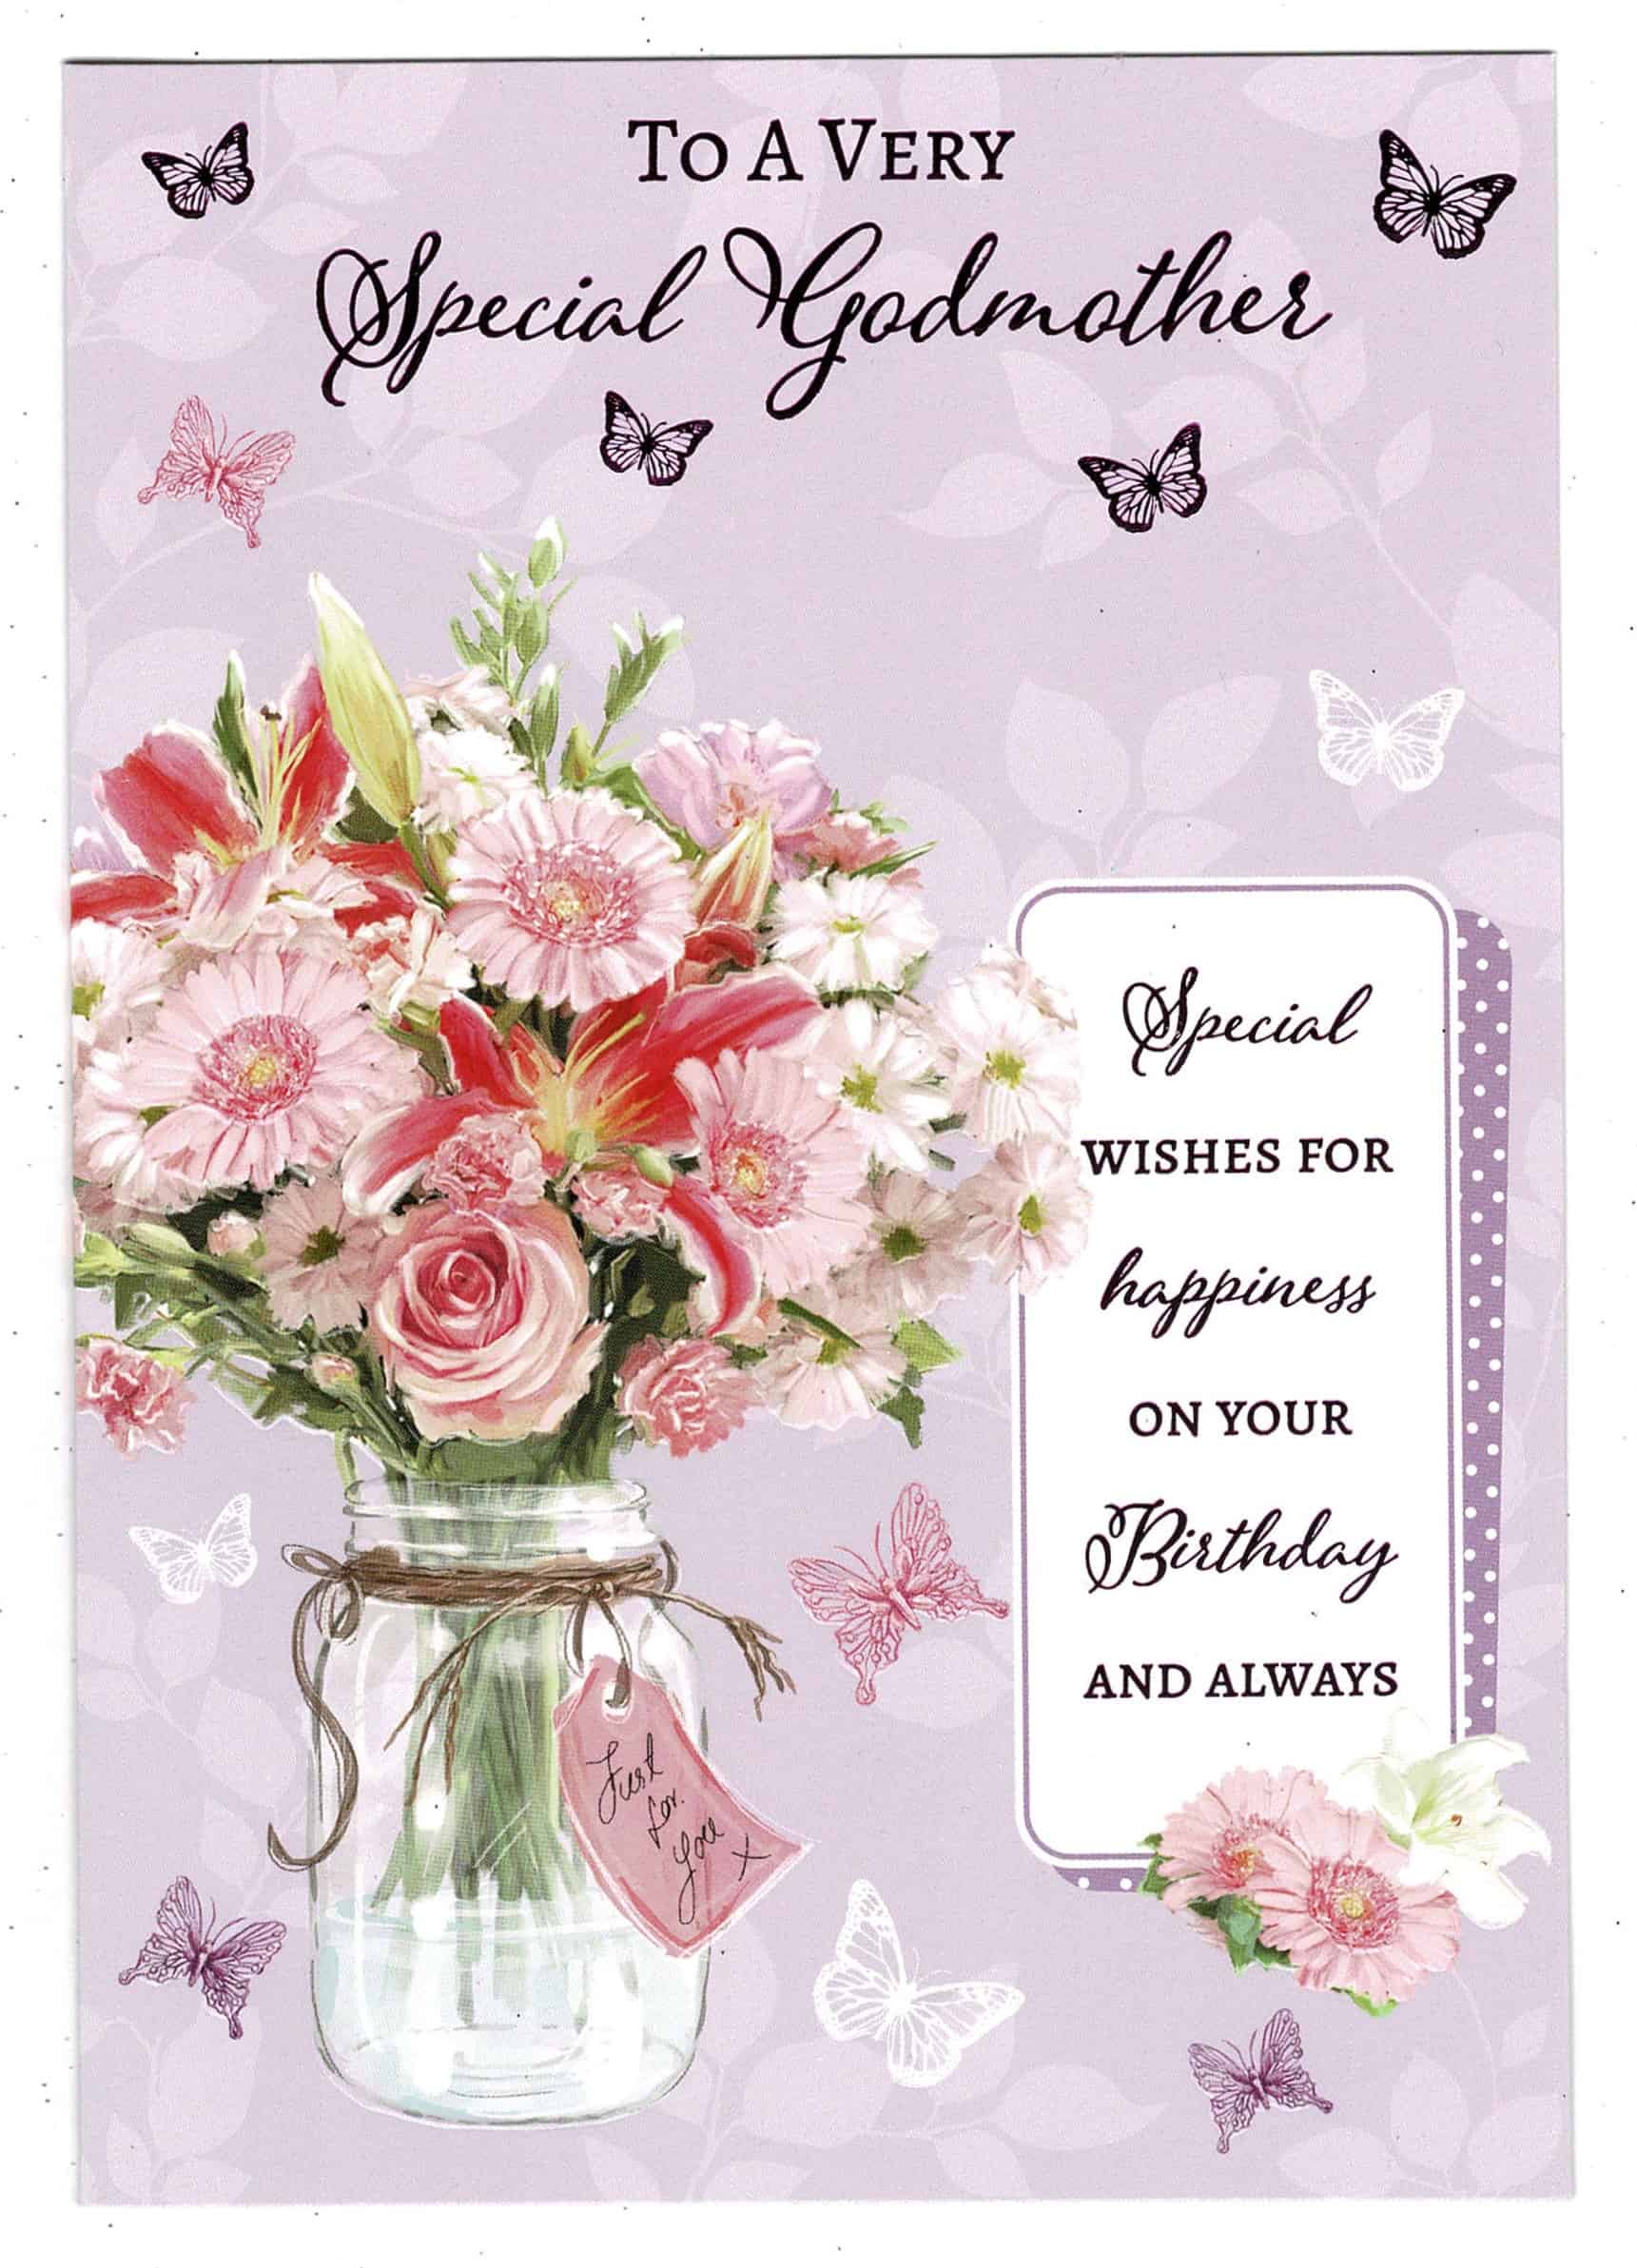 Godmother Birthday Card 'To A Very Special Godmother On Your Birthday